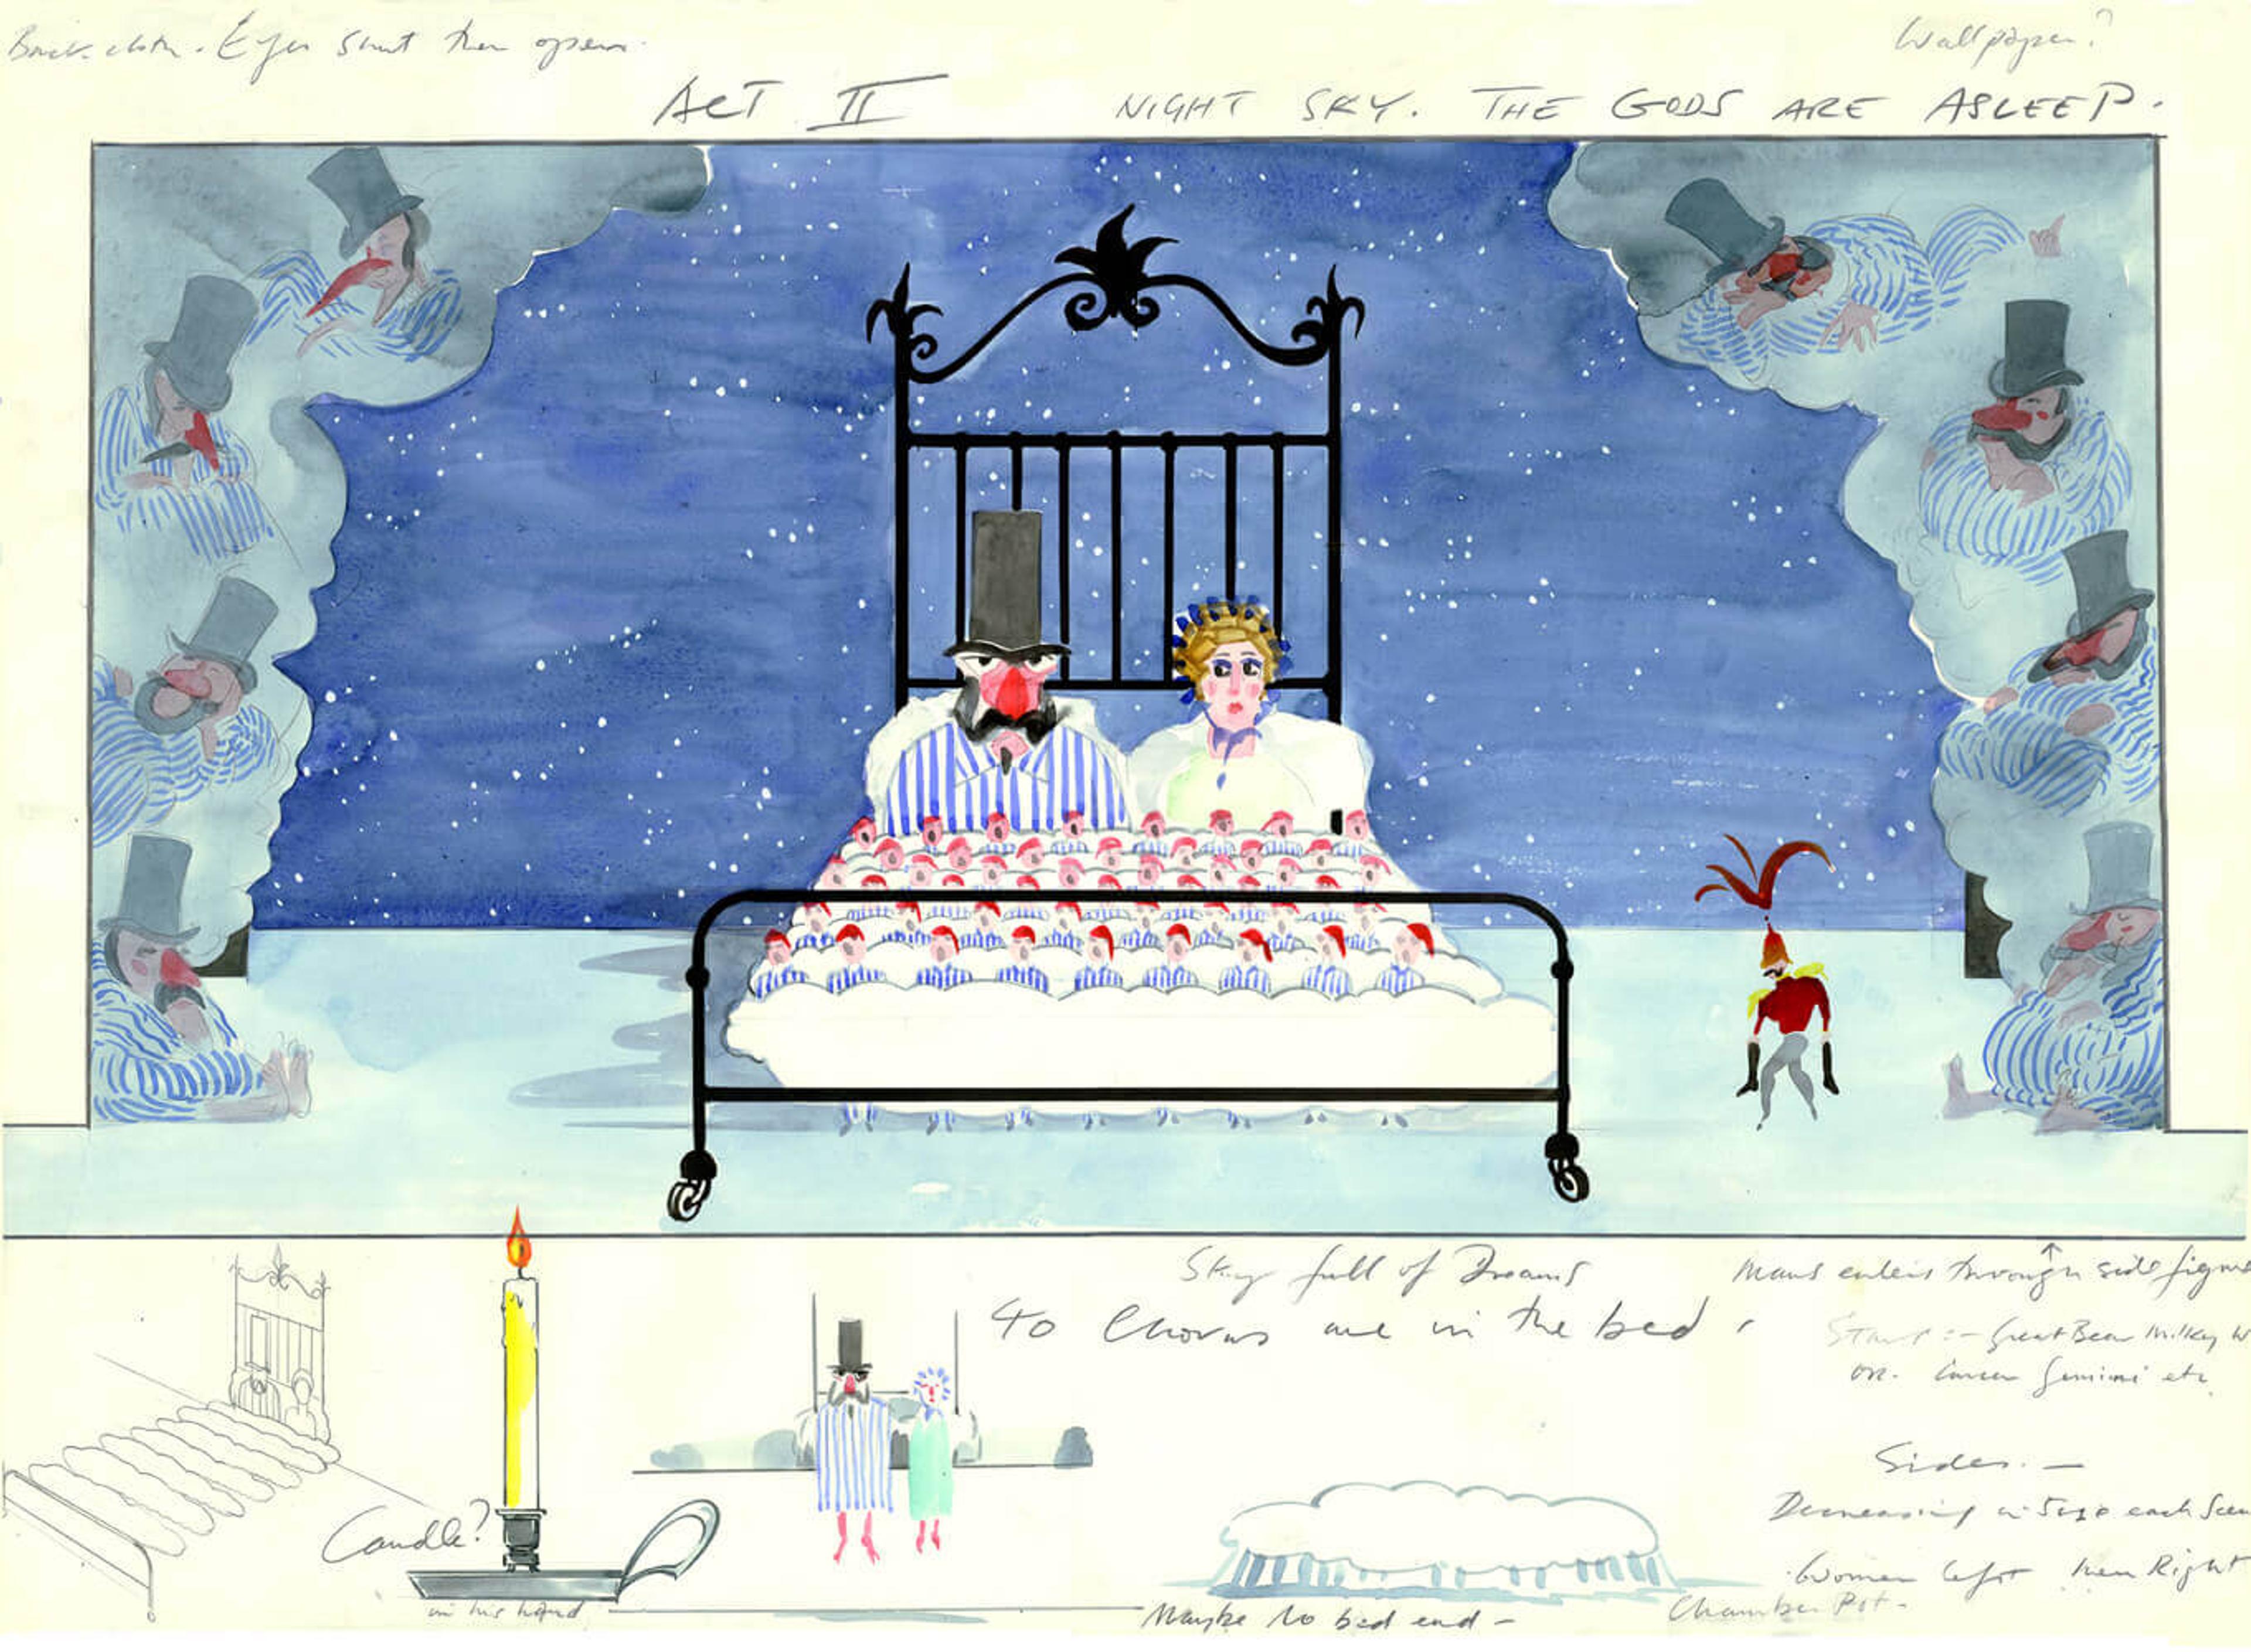 Illustration of a set design depicting a couple comprising a grumpy man wearing a top hat and a woman with hair curlers sitting on a bed. The image includes a small soldier stealthily skulking towards the bed.